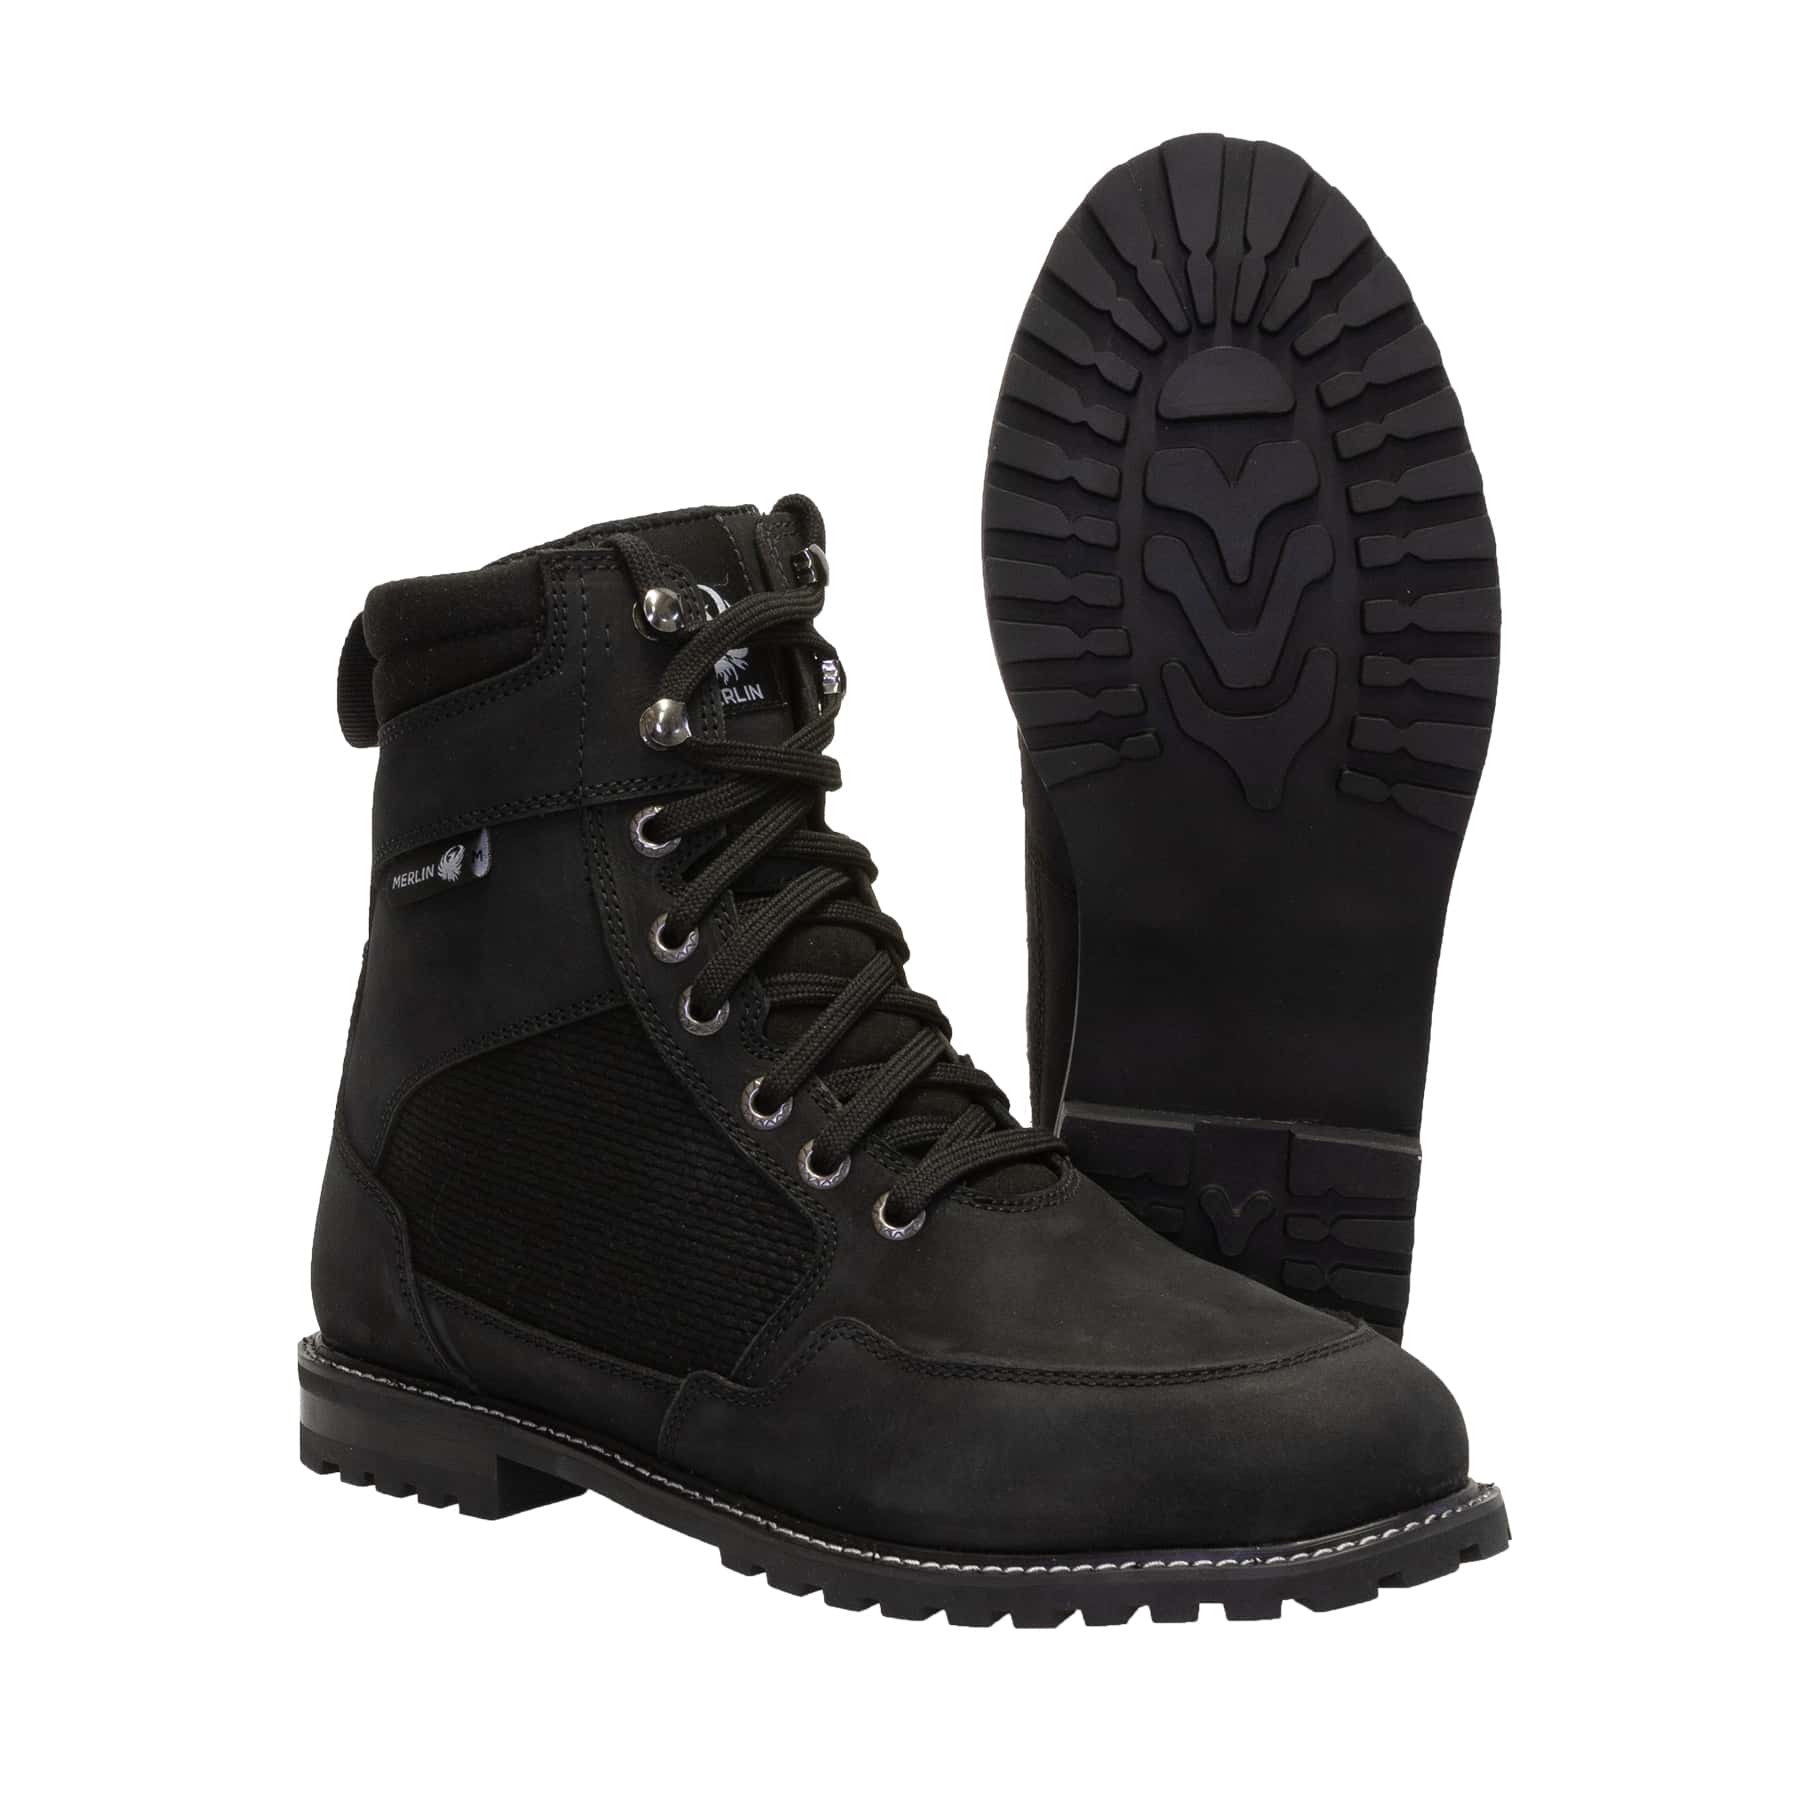 Rockwell-D3O-Boot-Sole